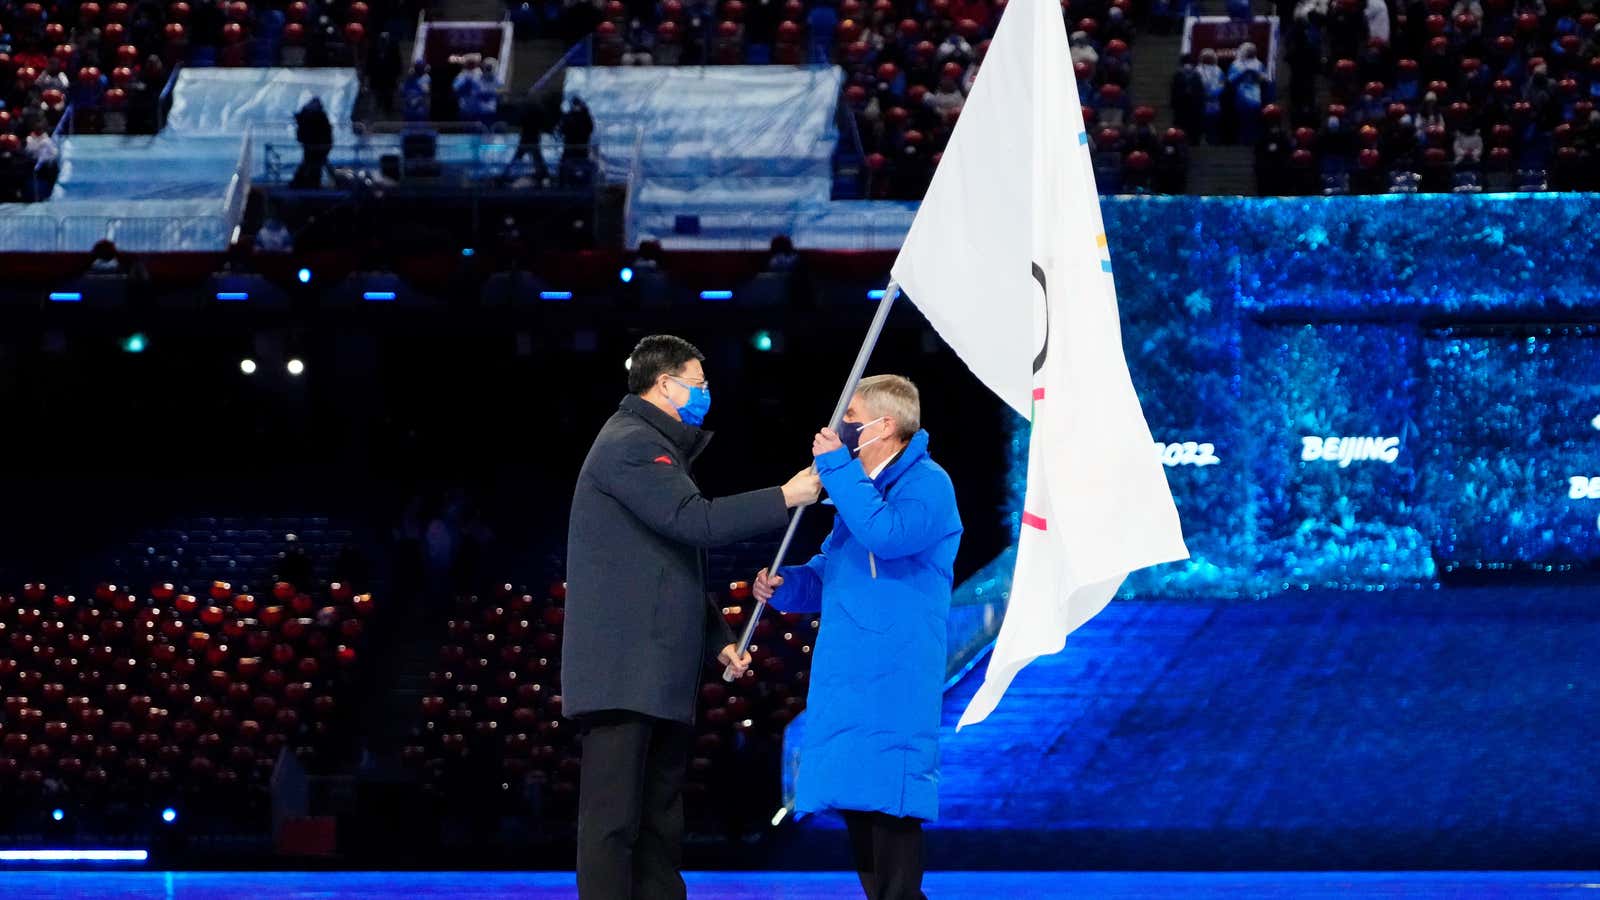 Mayor of Beijing Chen Jining hands IOC president Thomas Bach the Olympic flag during the closing ceremony.